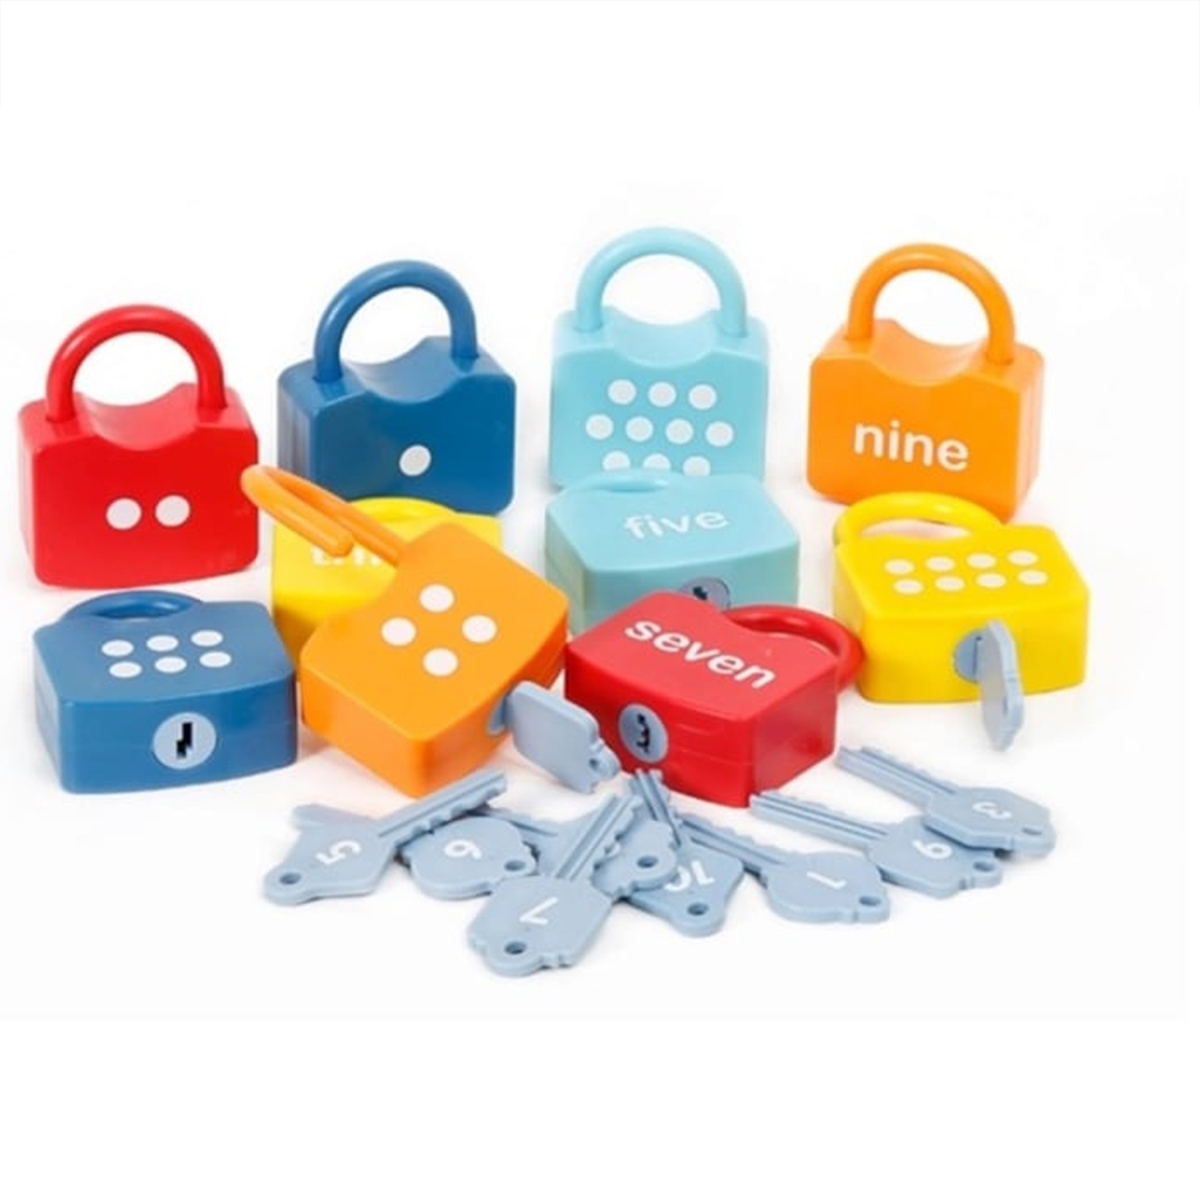 Picture of Zummy FS1133-M1 Numbers Keys and Locks Learning Toy with 10 Locks and 10 Keys